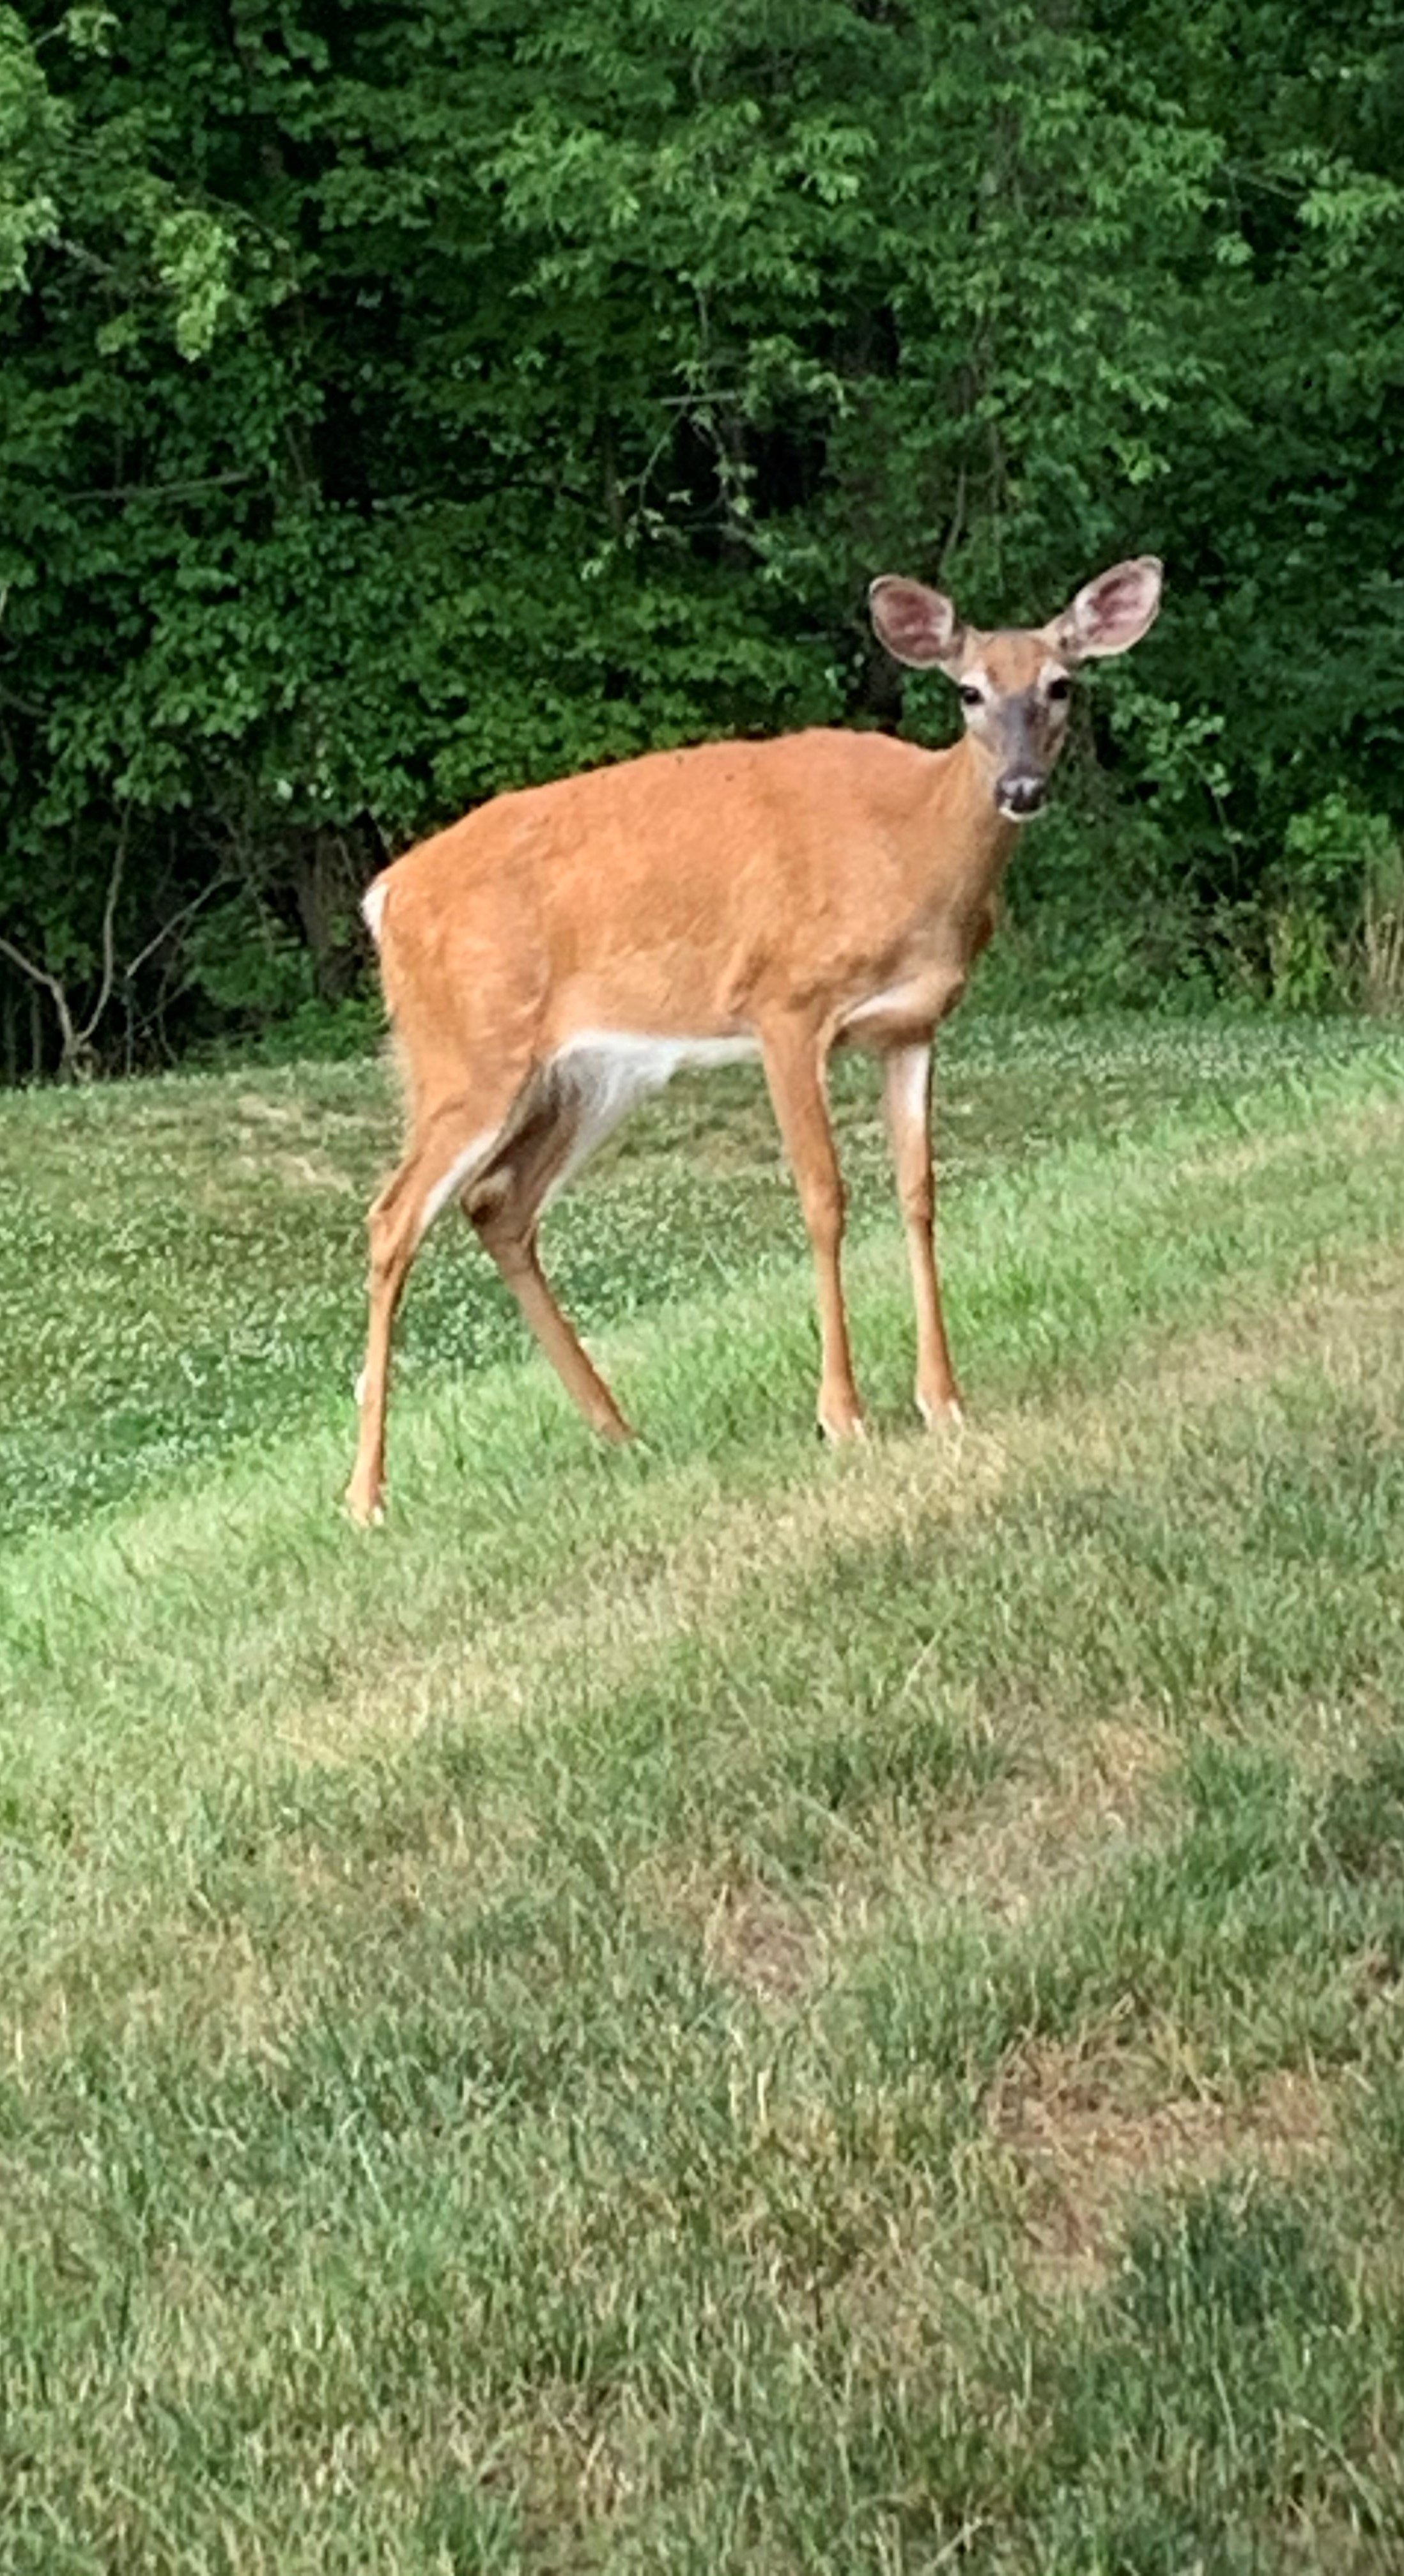 Momma deer standing tall and proud